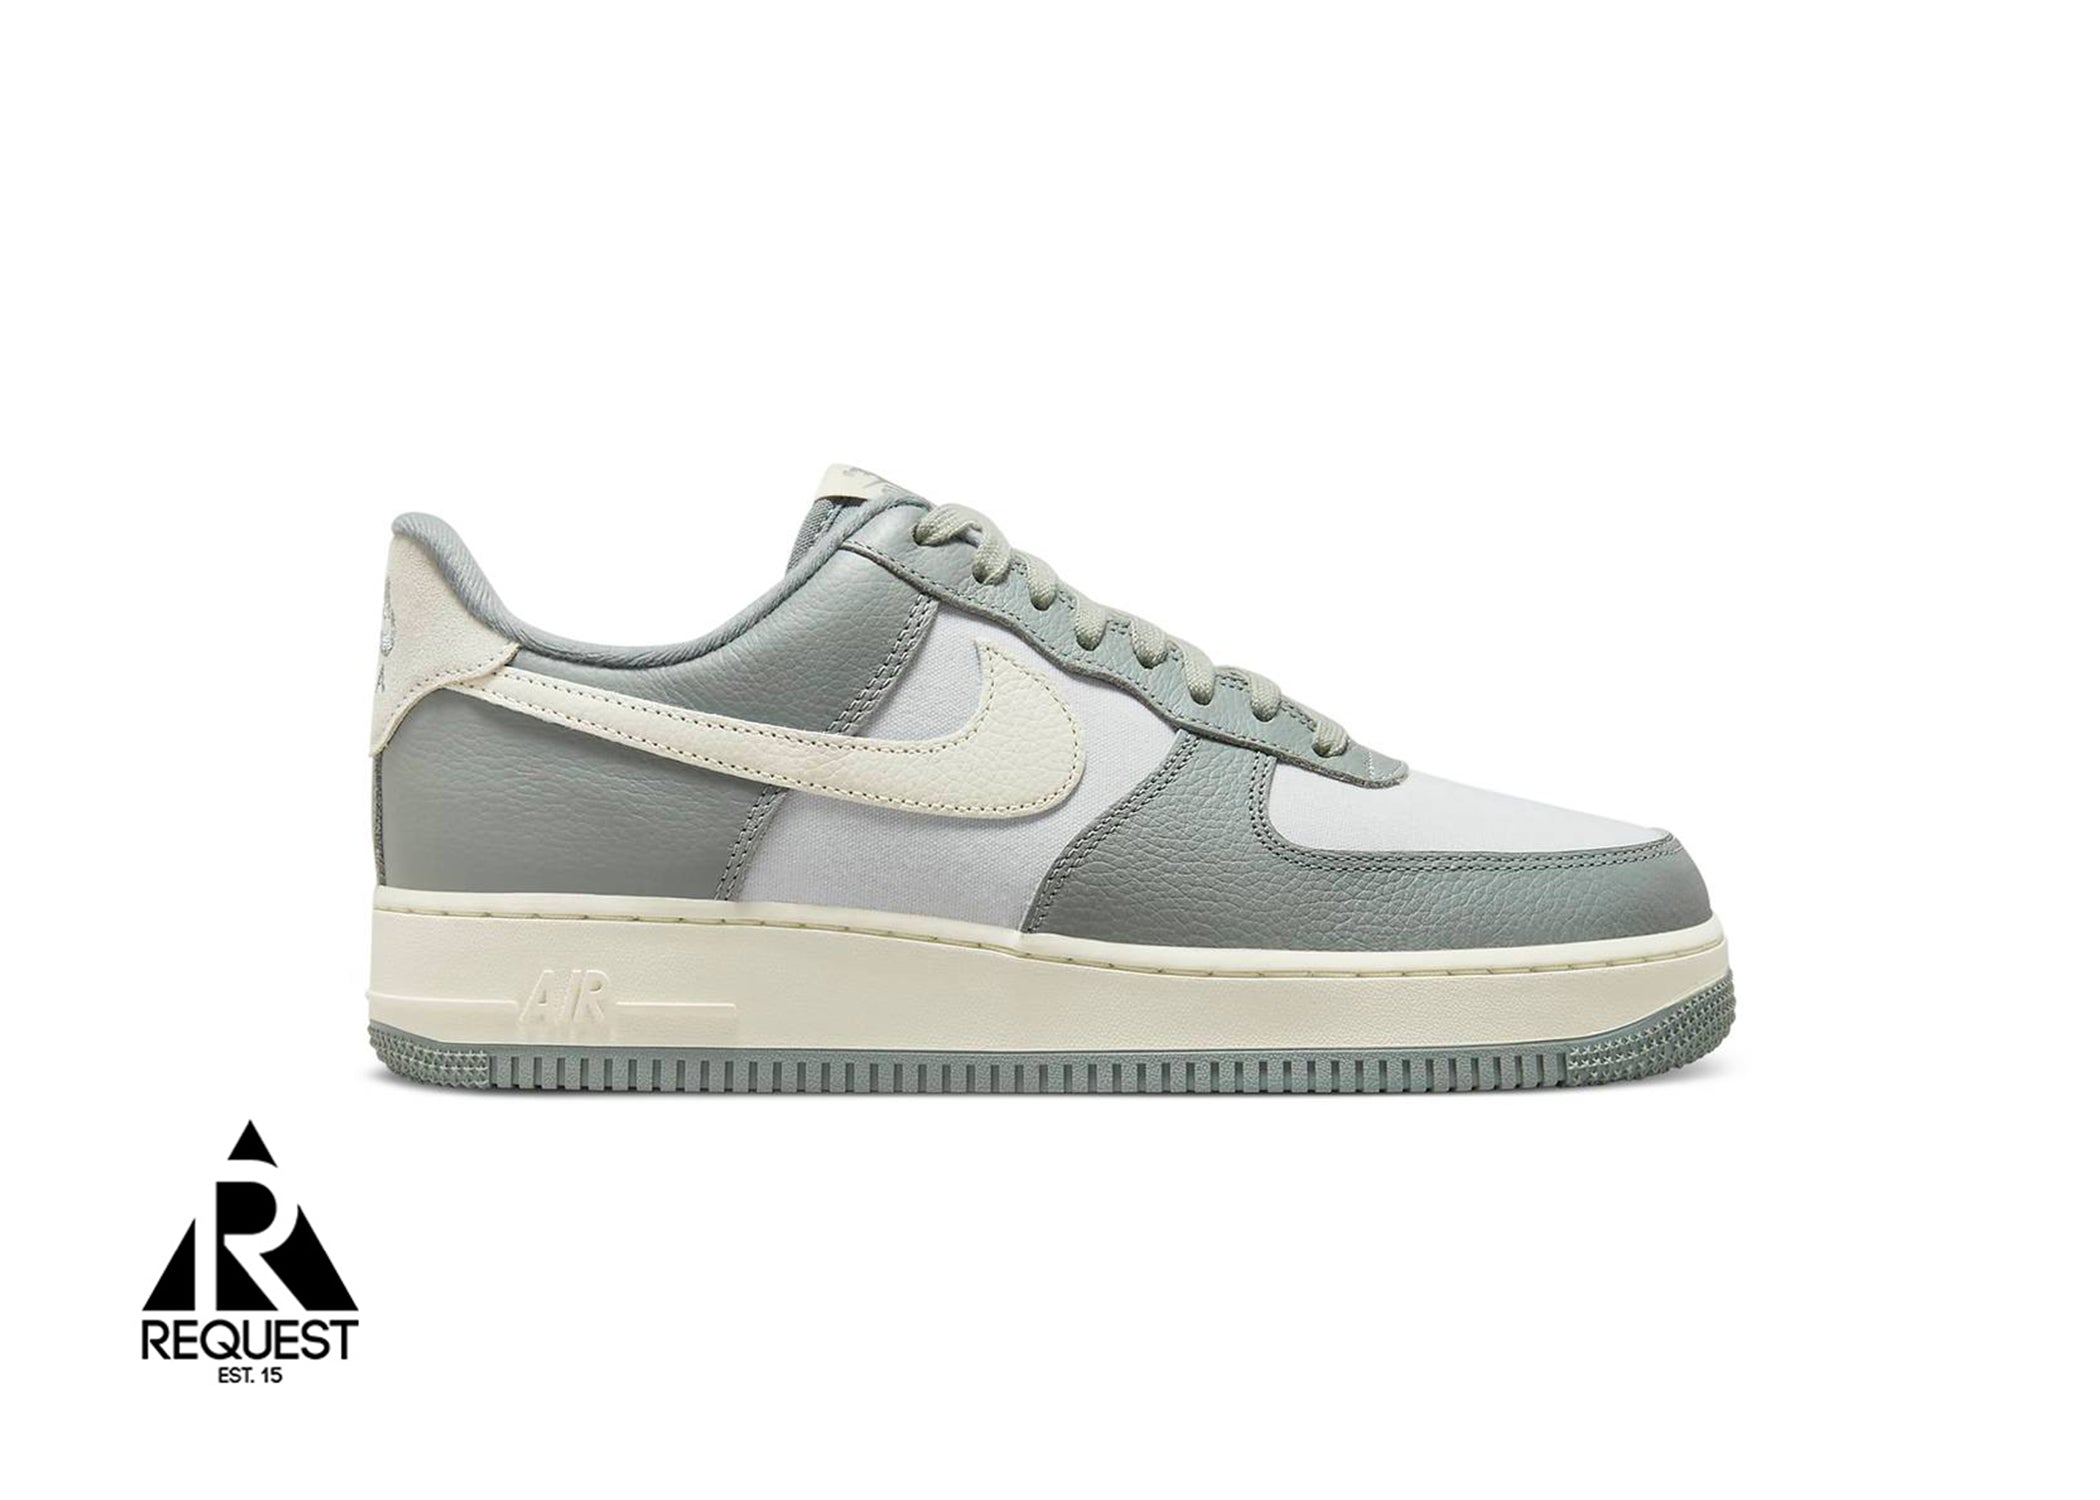 Nike Air Force 1 '07 LX Low "Mica Green Coconut"